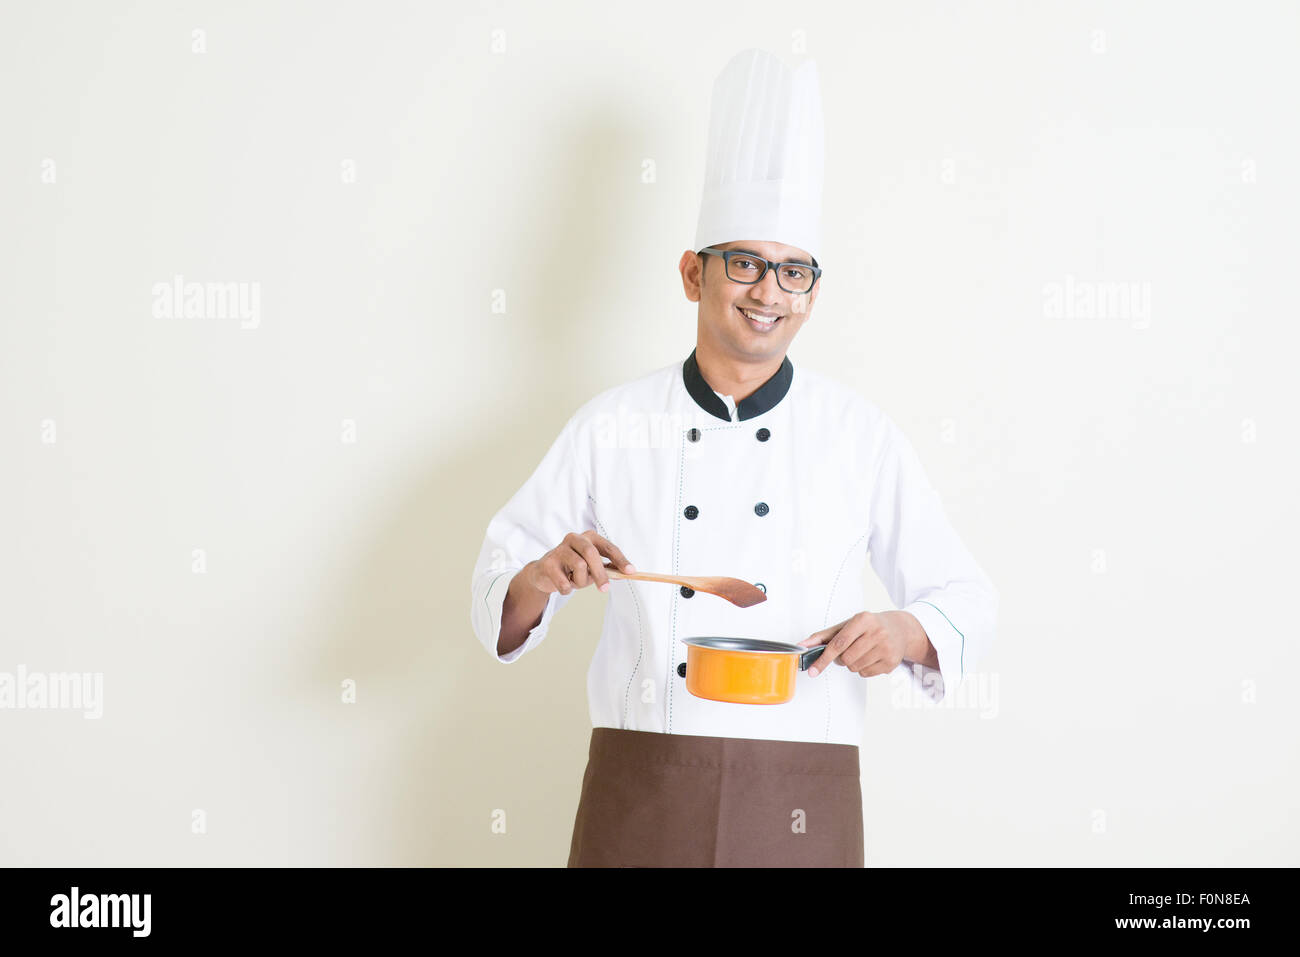 Portrait of handsome Indian male chef in uniform holding cooking pot and stirring food, standing on plain background with shadow Stock Photo